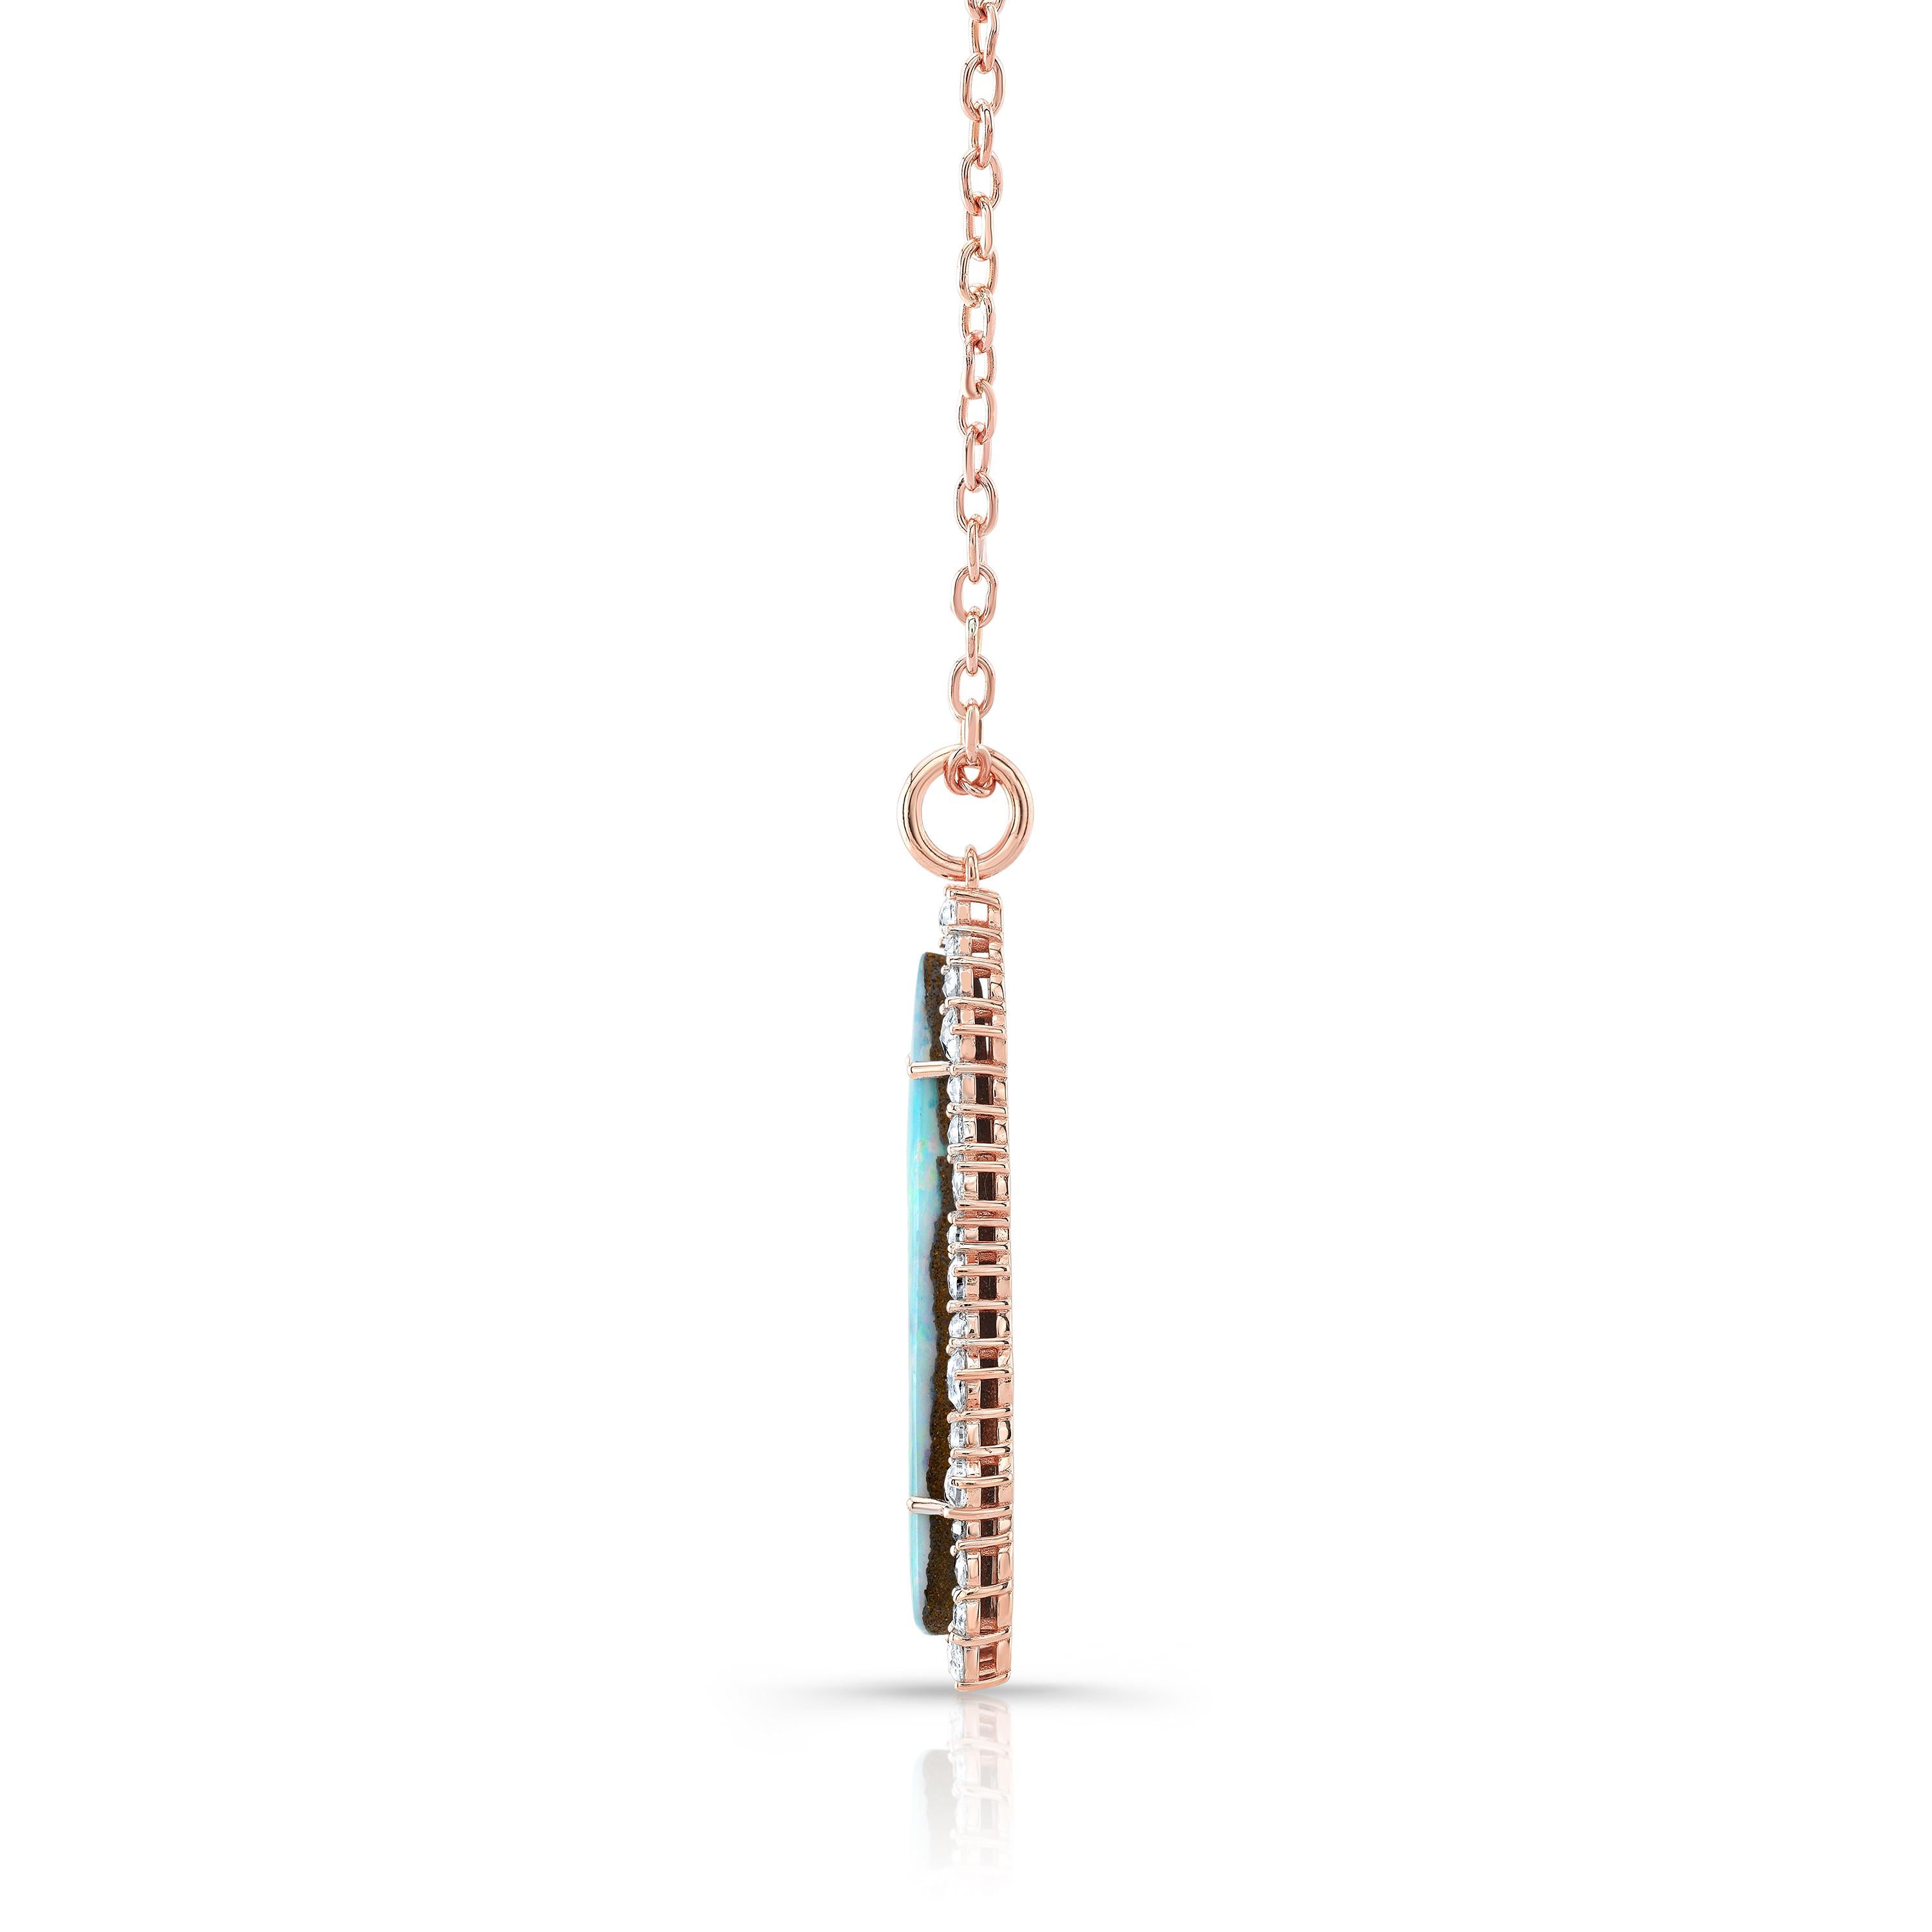 Amy Y's boulder opal and diamond contemporary pendant necklace is a one-of-a-kind piece for all occasions.  Set superbly in 18K-rose gold, is this primarily blue,  green and hints of pink-colored boulder opal,  generously surrounded by a row of